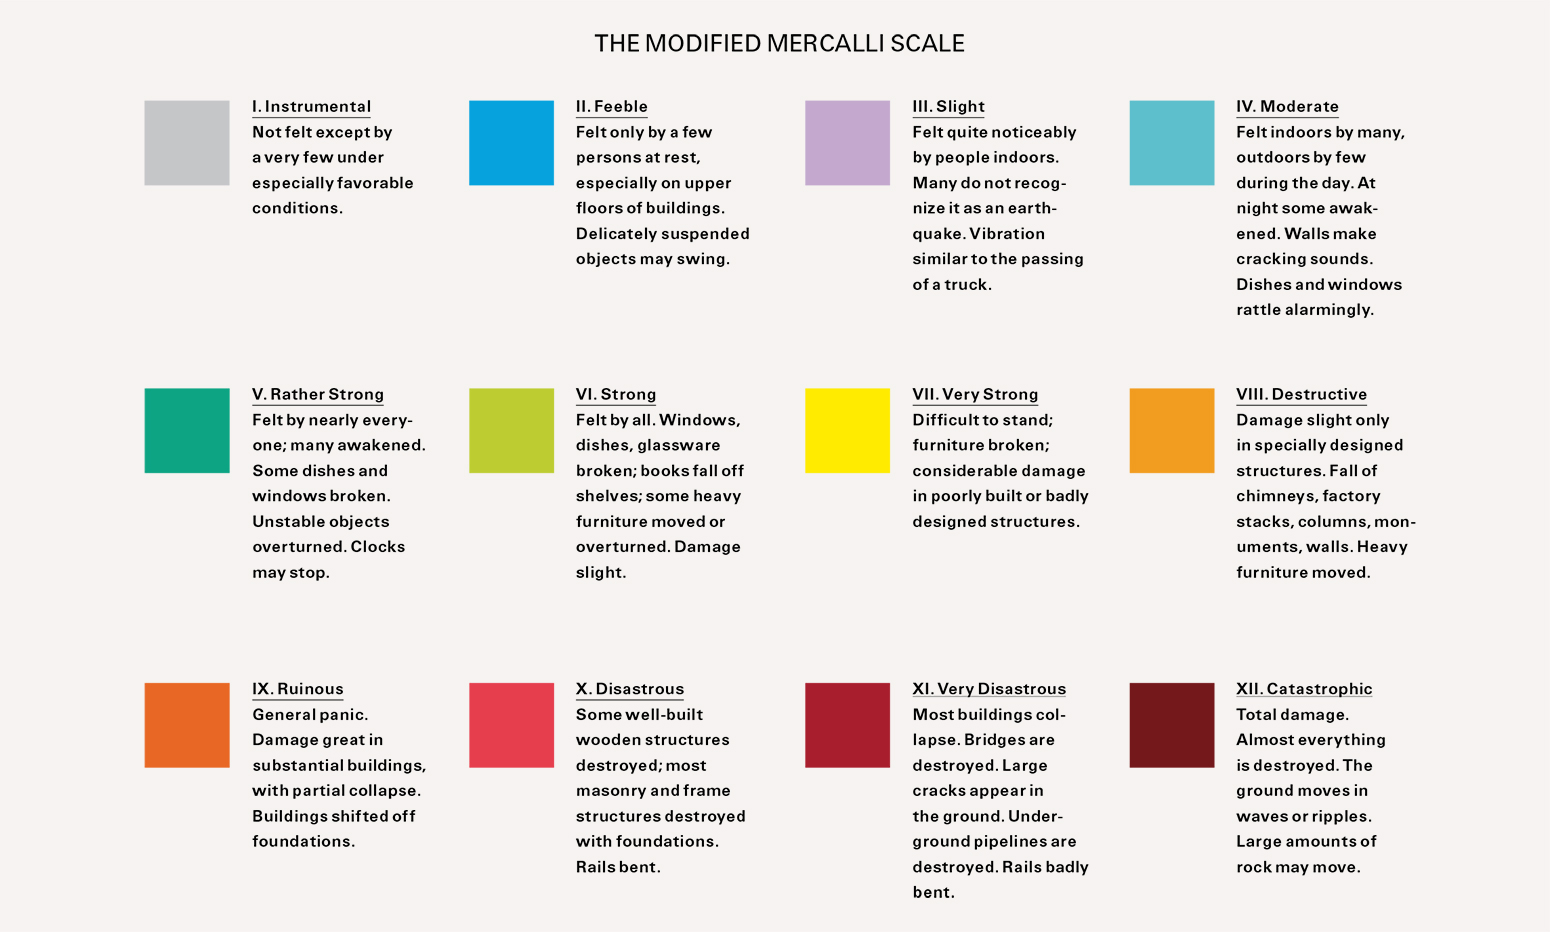 A Modified Mercalli Scale, which estimates the shaking intensity from an earthquake at a specific location by considering its effects on people, objects, and buildings.